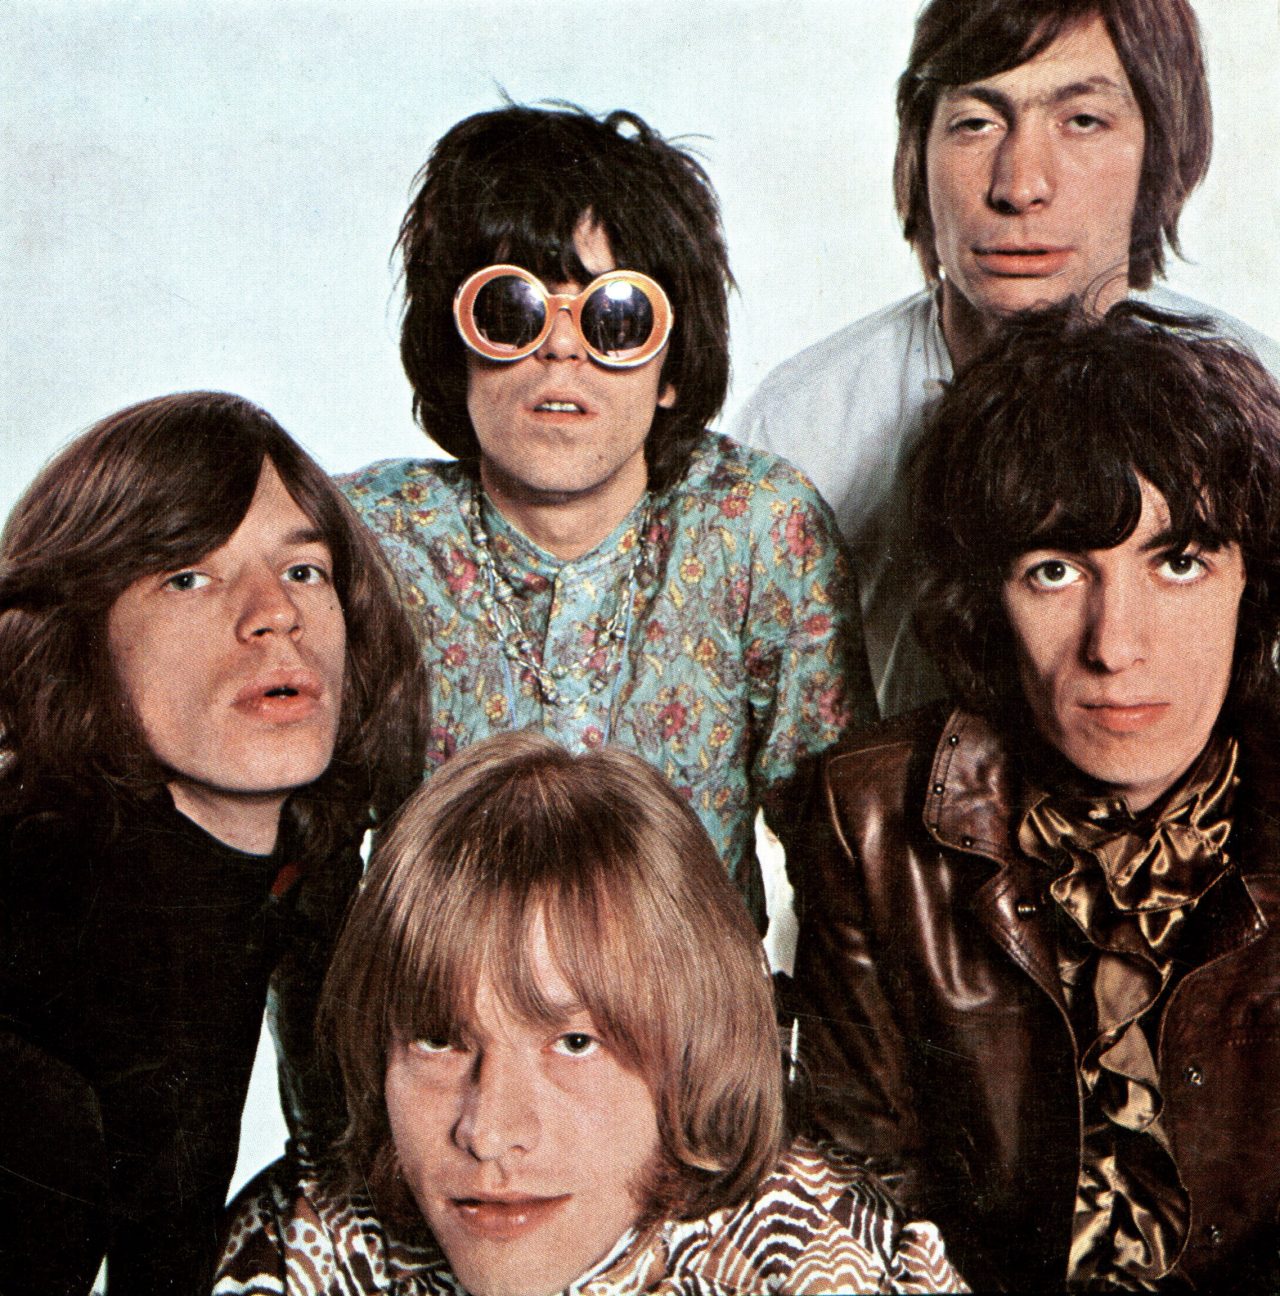 UNSPECIFIED - JANUARY 01:  (AUSTRALIA OUT) Photo of ROLLING STONES and Charlie WATTS and Mick JAGGER and Keith RICHARDS and Bill WYMAN and Brian JONES; Posed group portrait Clockwise from left - Mick Jagger, Keith Richards, Charlie Watts, Bill Wyman and Brian Jones  (Photo by GAB Archive/Redferns)